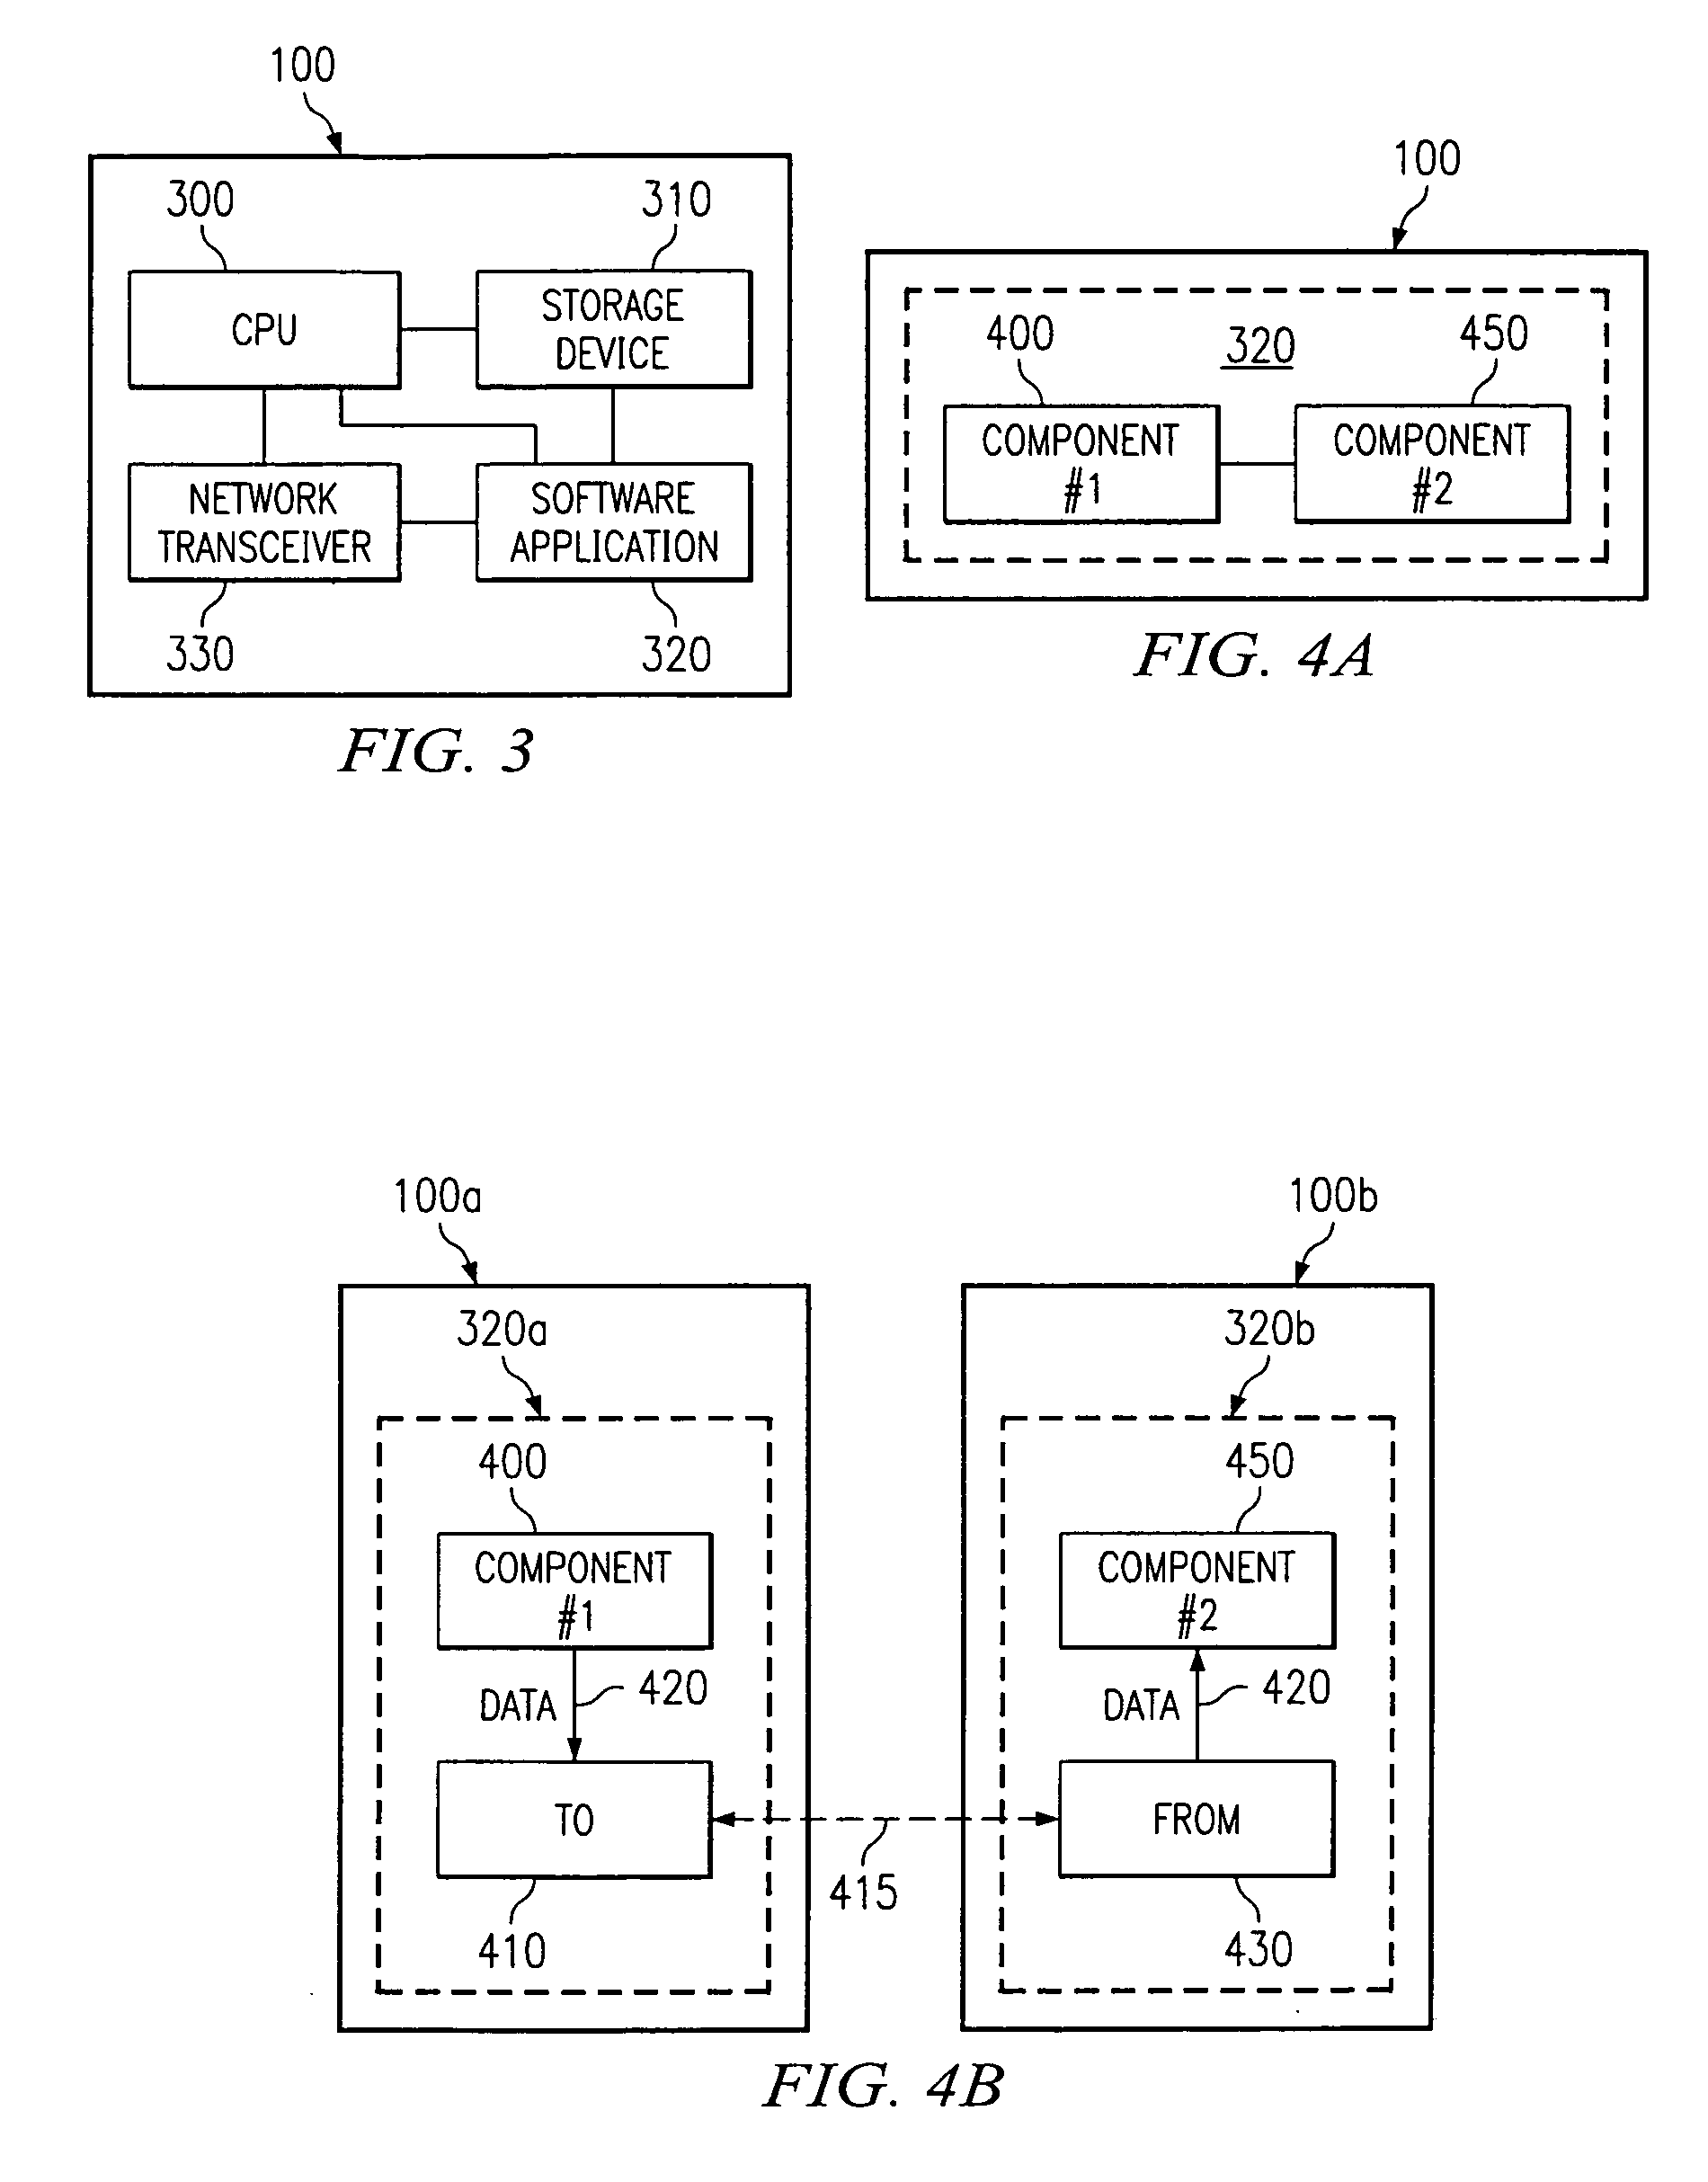 Computing system and method for transparent, distributed communication between computing devices